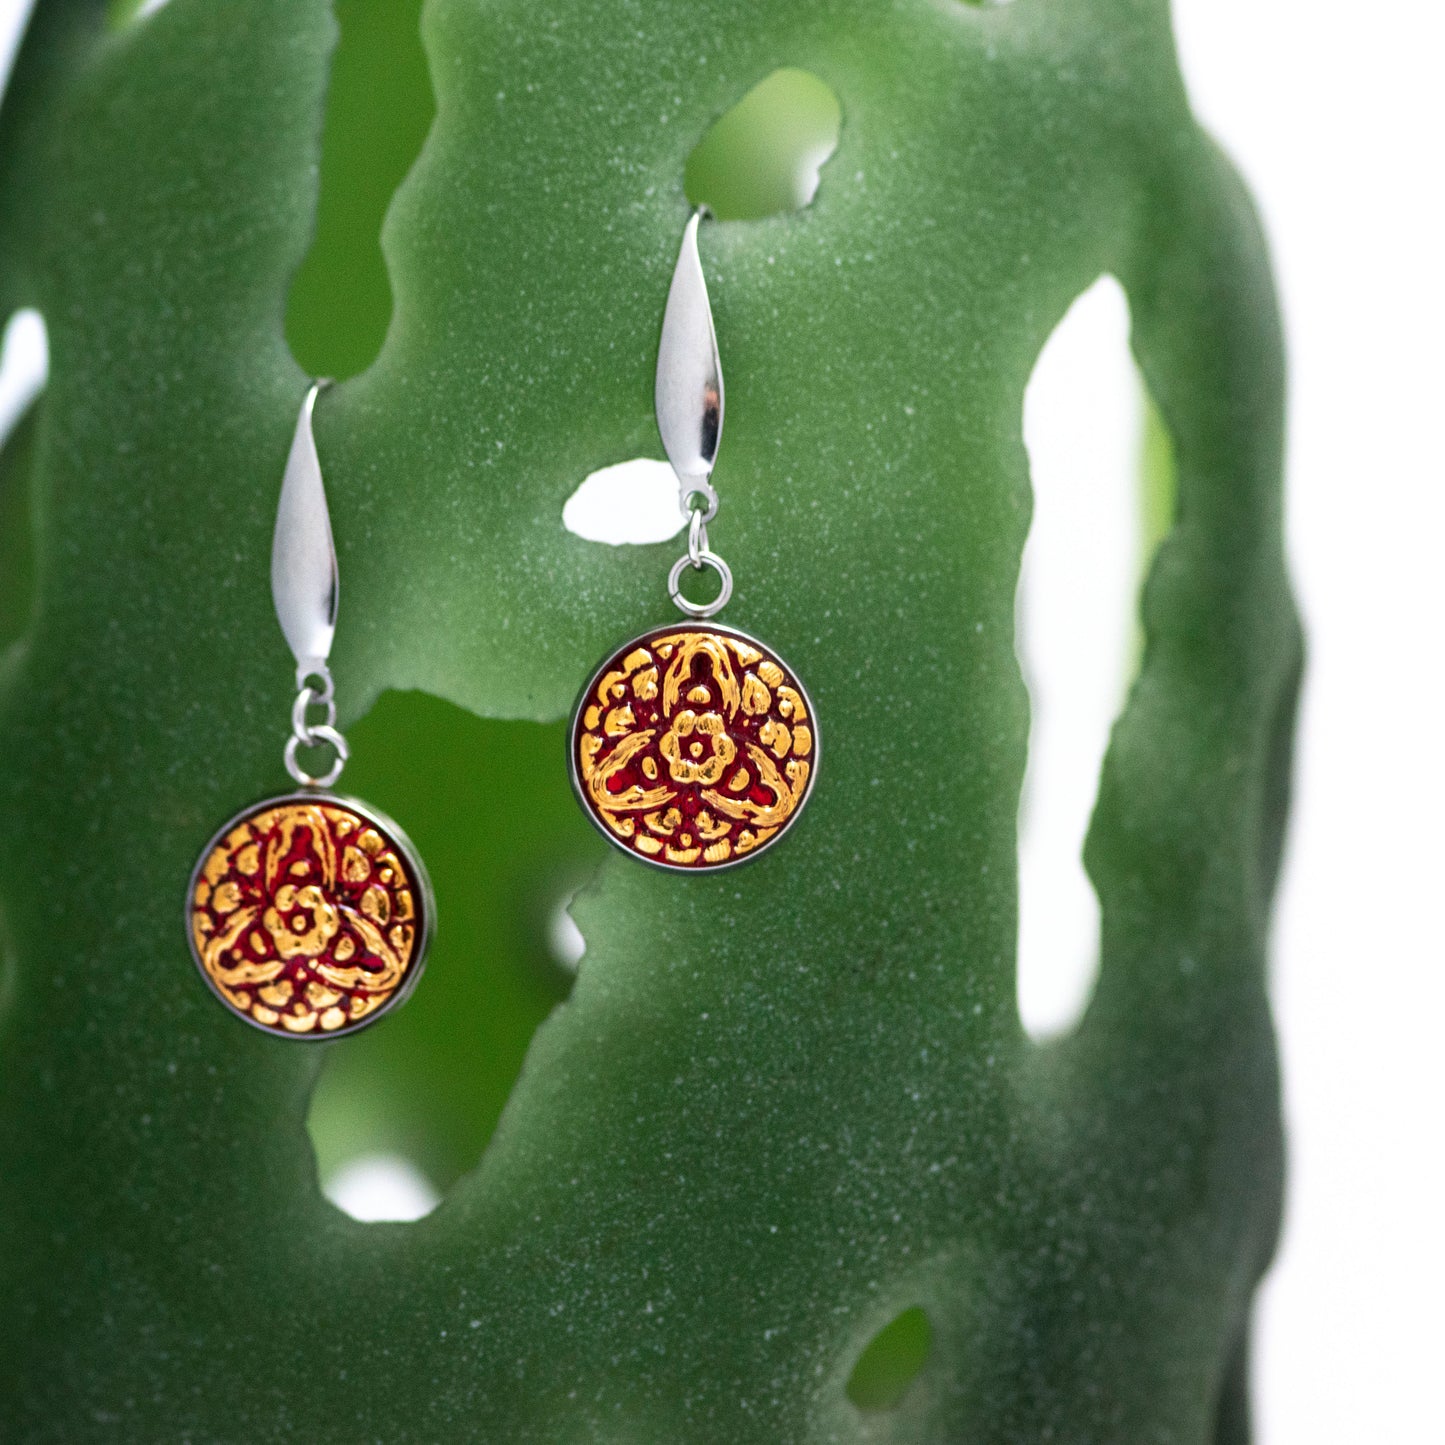 Red and 24k gold painted Czech glass buttons dangle earrings.